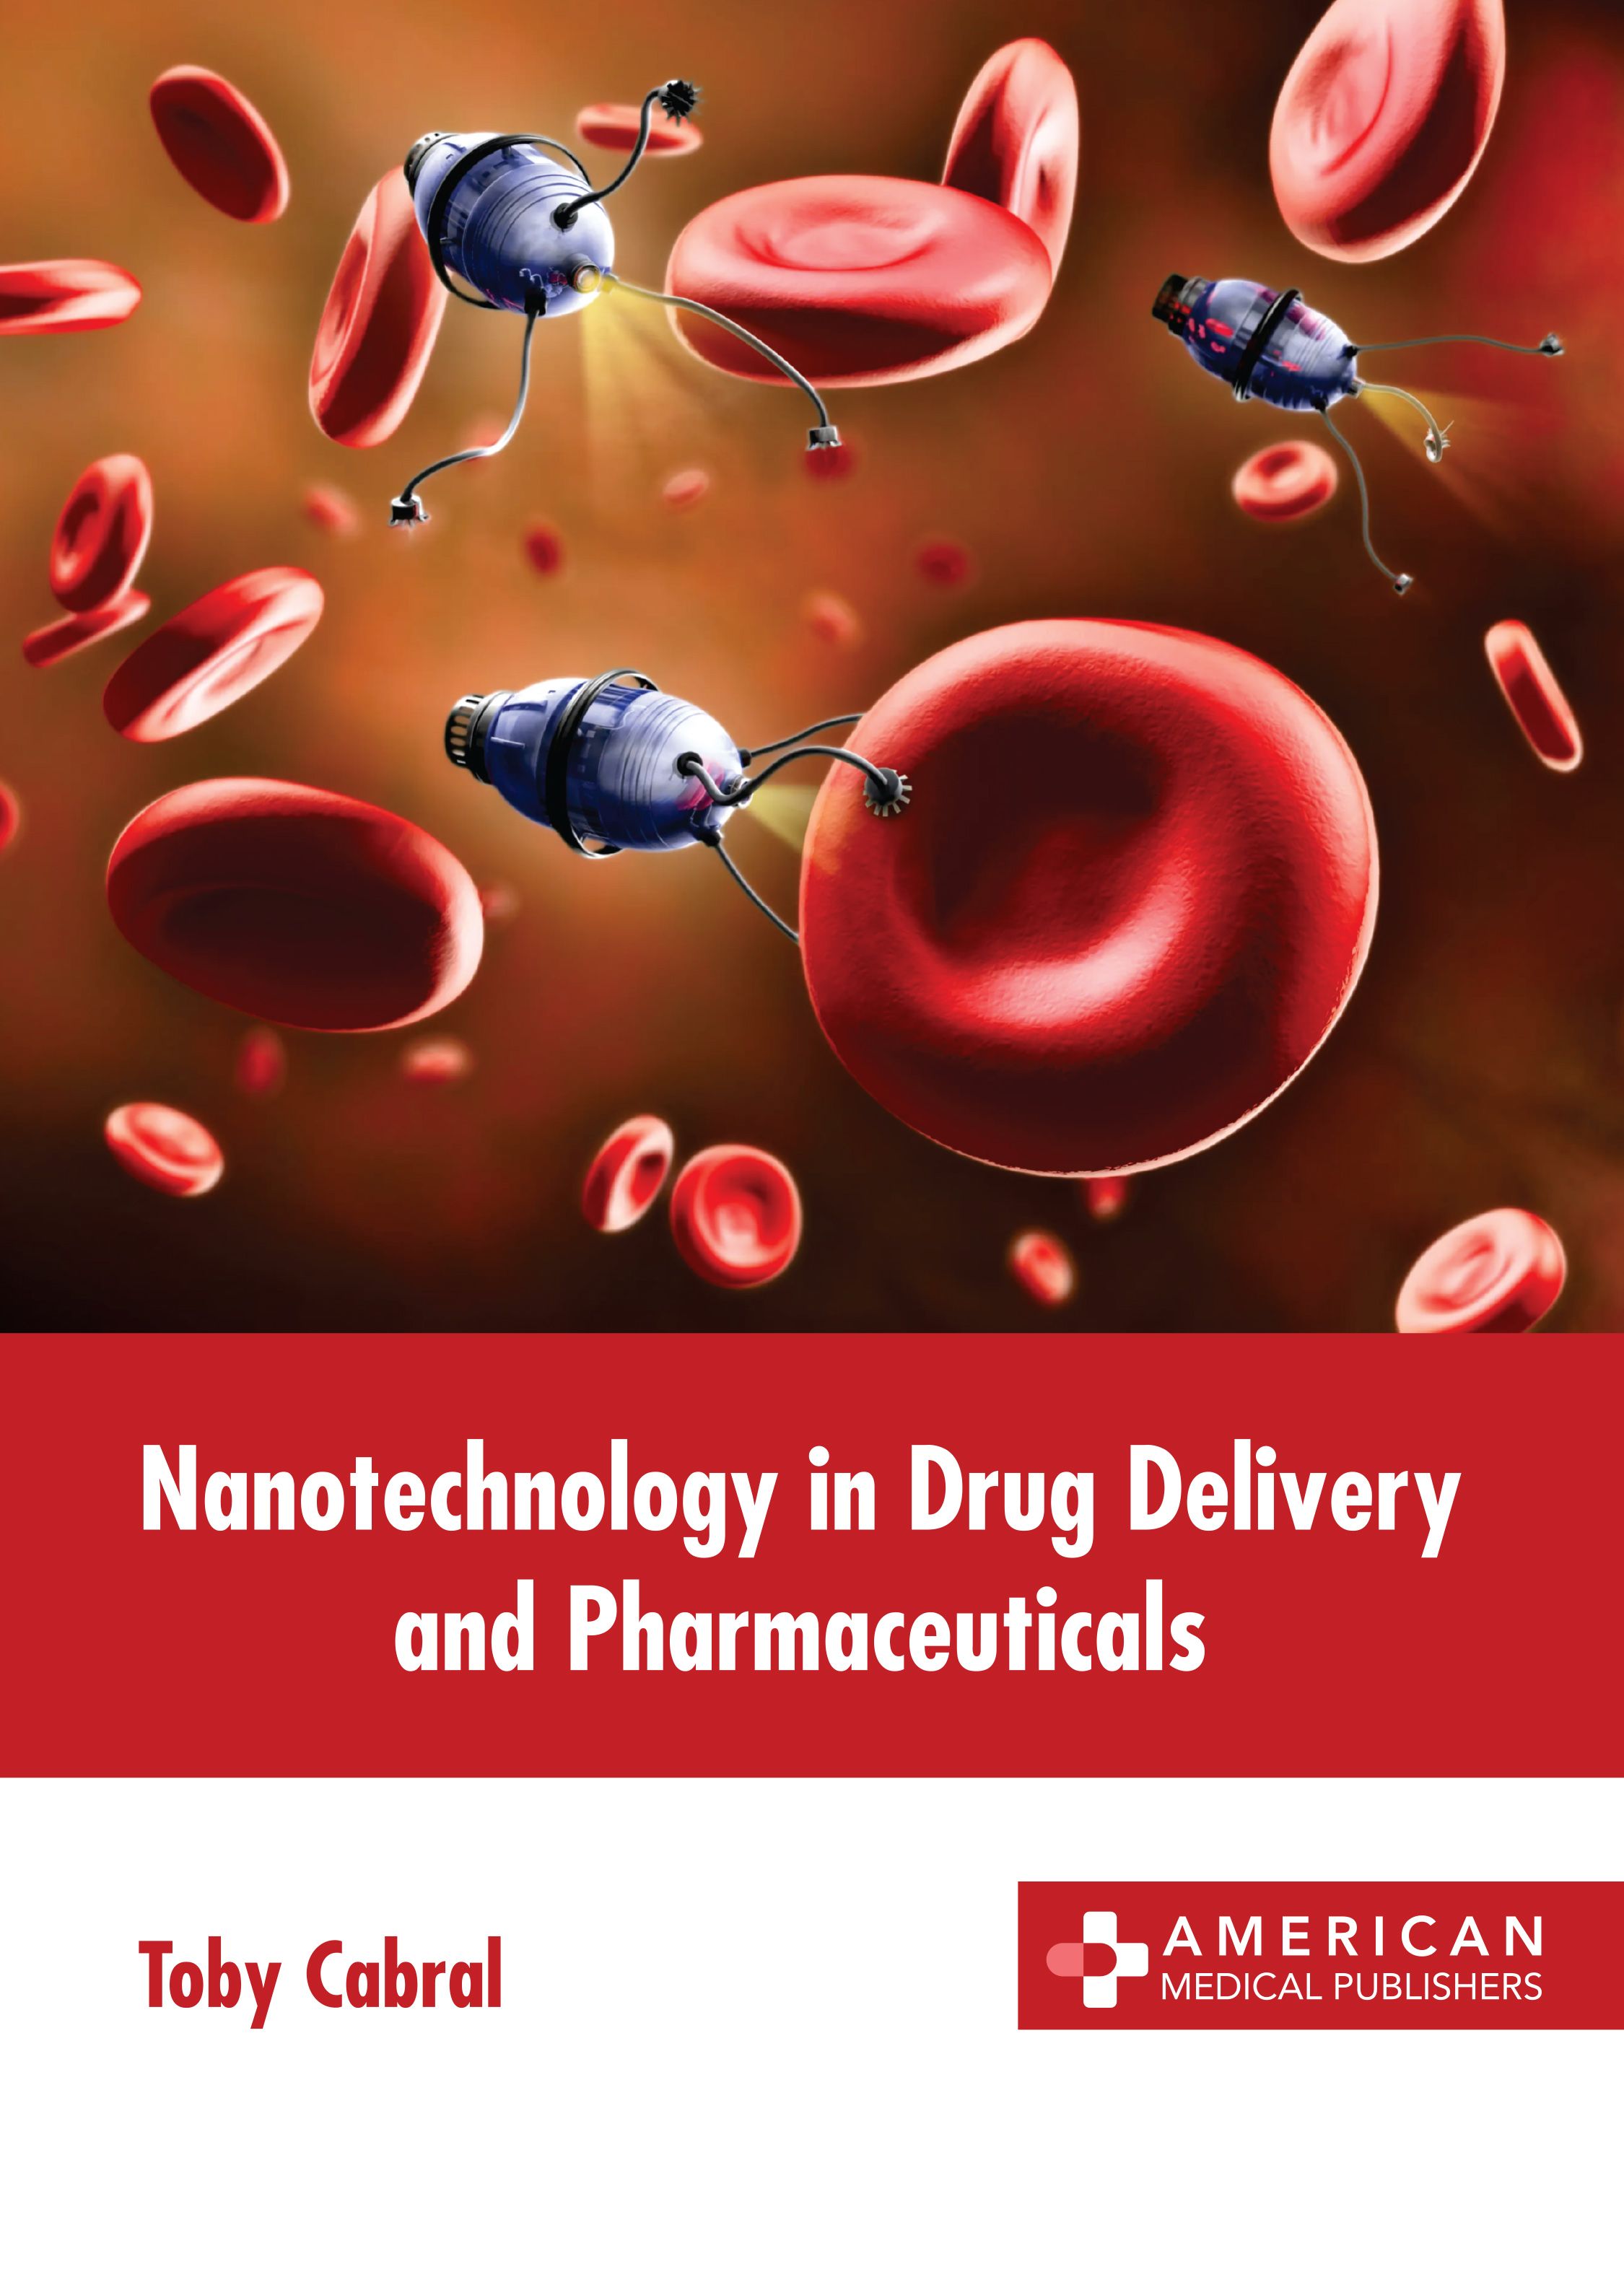 NANOTECHNOLOGY IN DRUG DELIVERY AND PHARMACEUTICALS